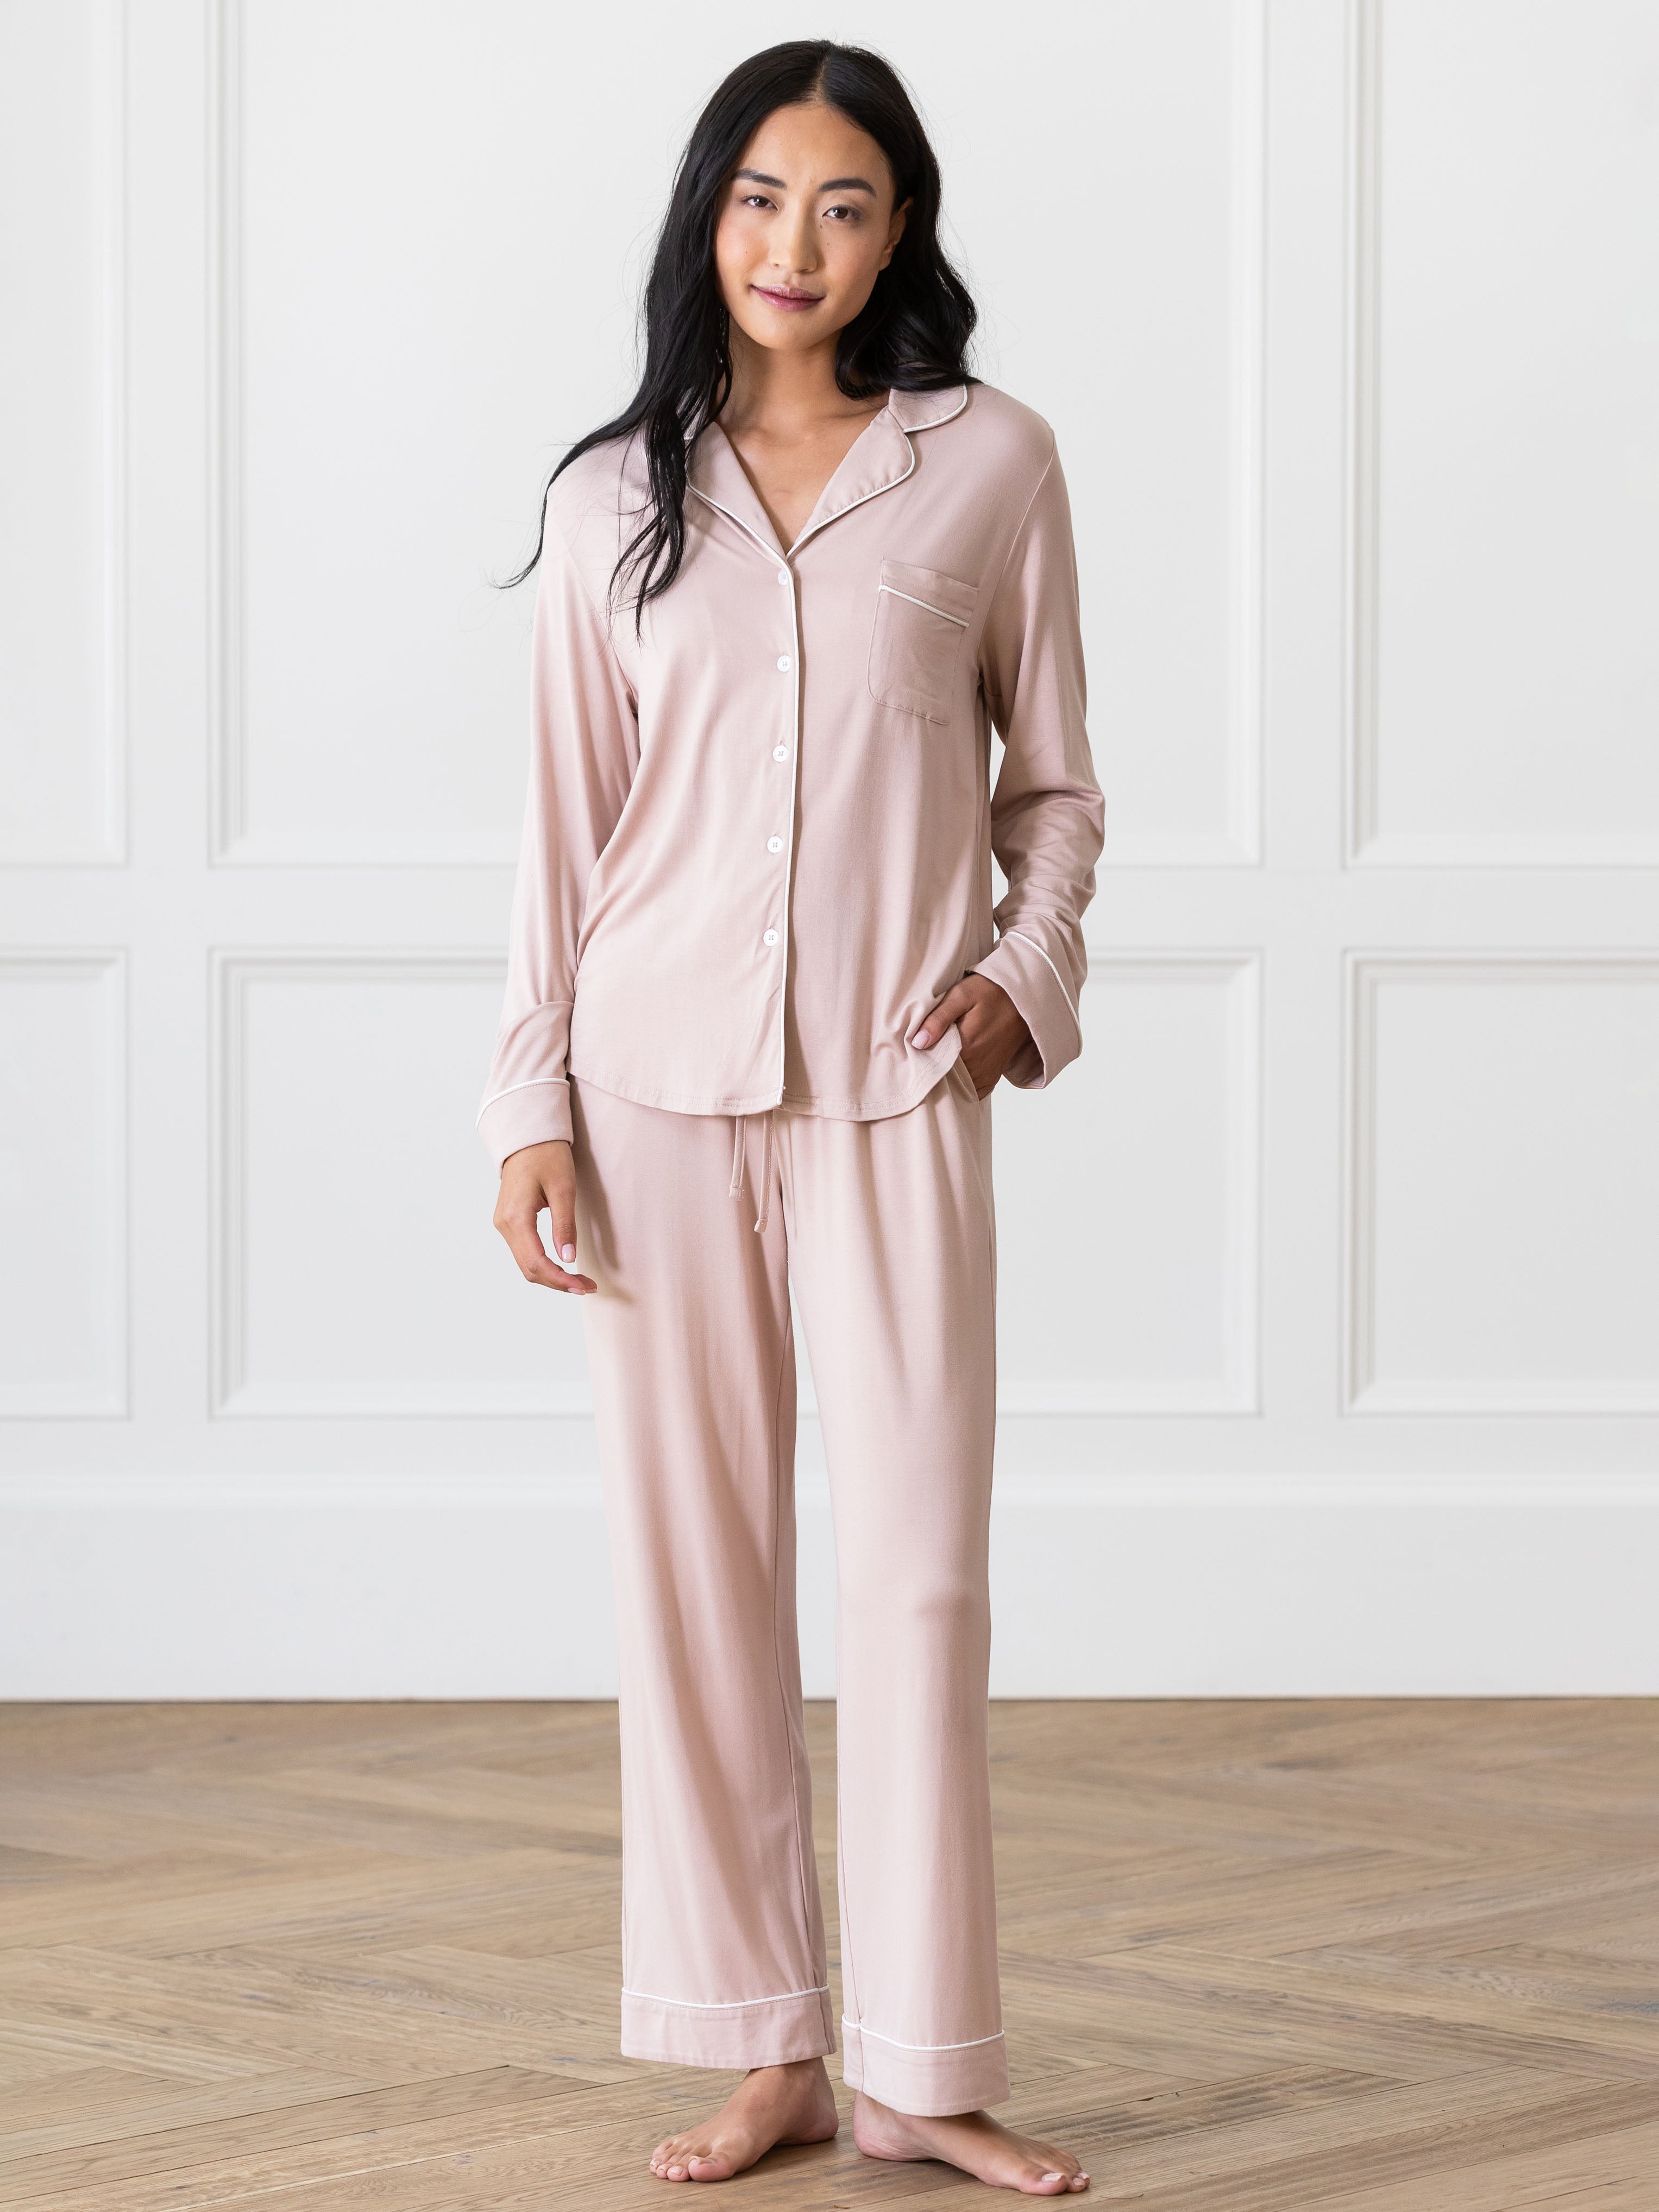 Blush Long Sleeve Pajama Set modeled by a woman. The photo was taken in a high contrast setting, showing off the colors and lines of the pajamas. |Color:Blush